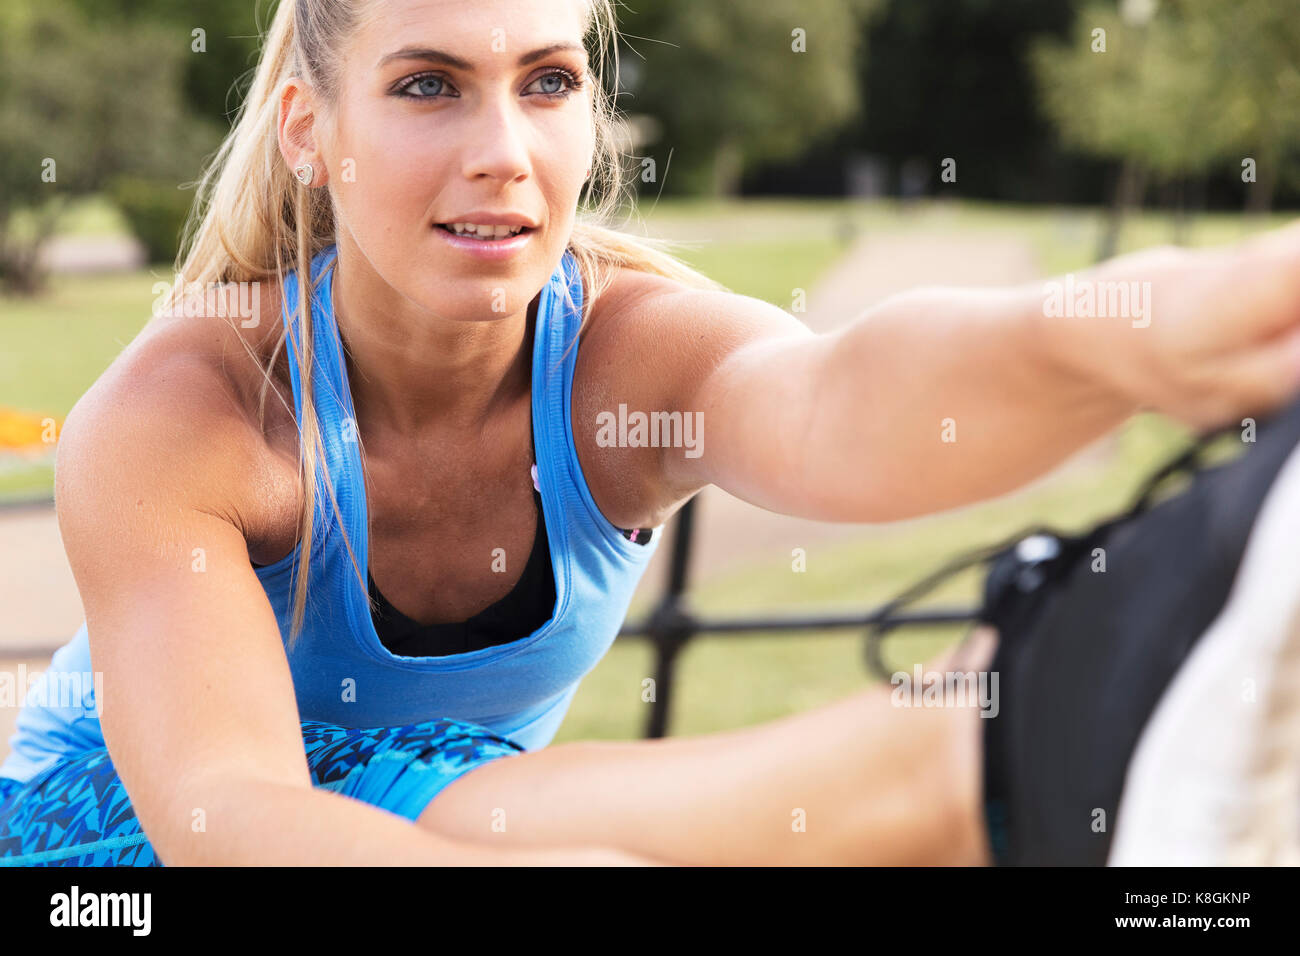 Young woman training in park, touching toes Stock Photo